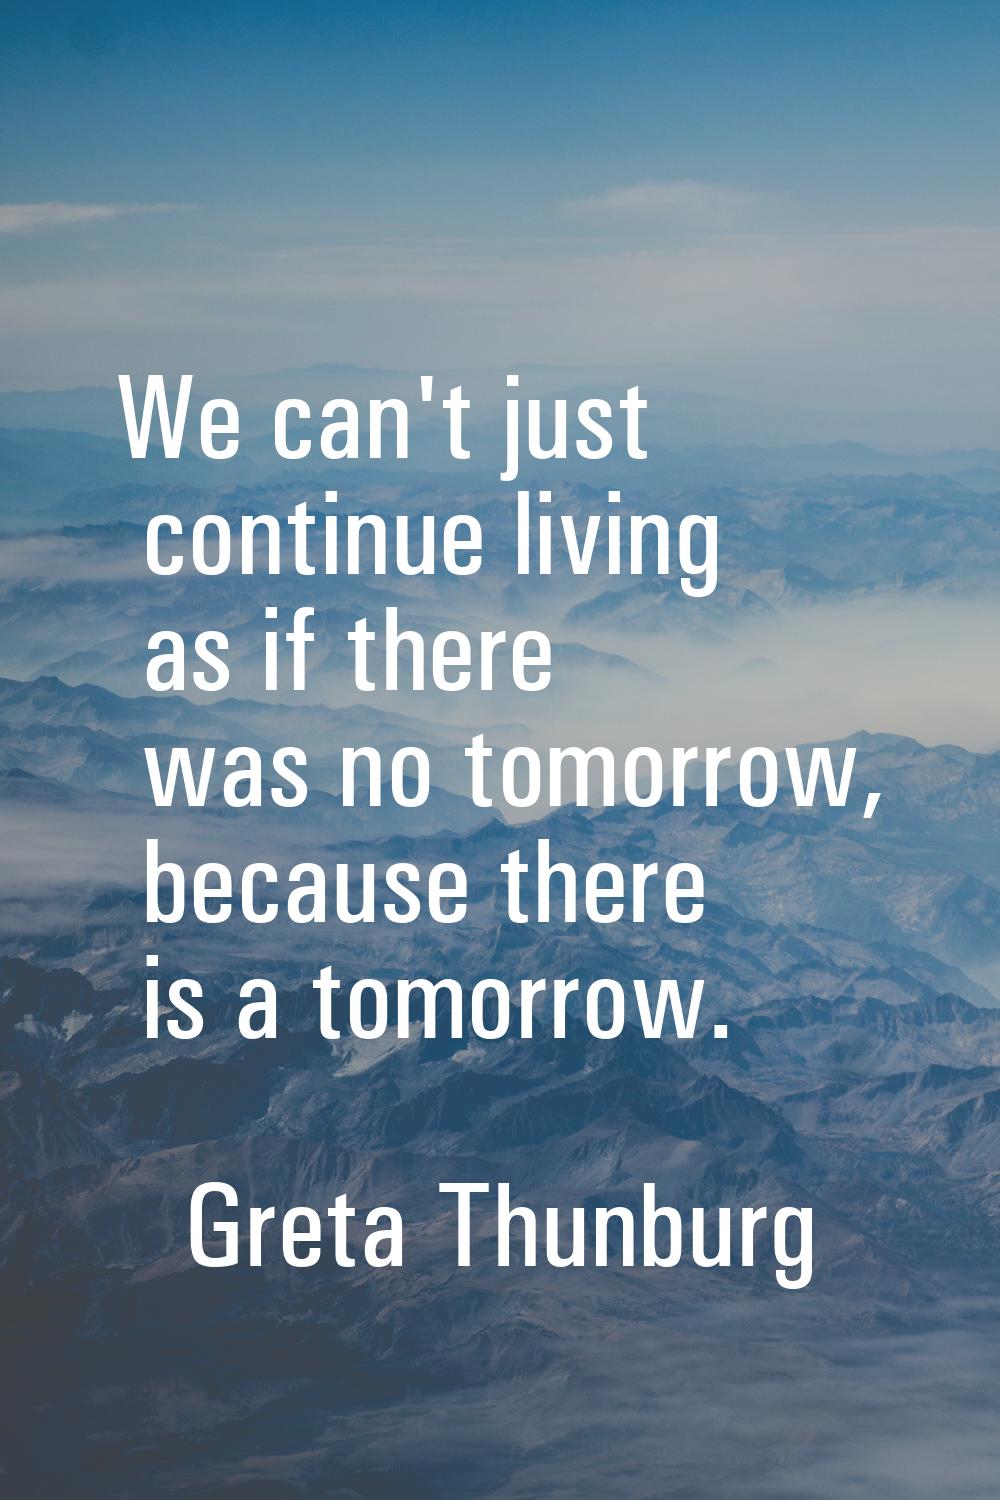 We can't just continue living as if there was no tomorrow, because there is a tomorrow.